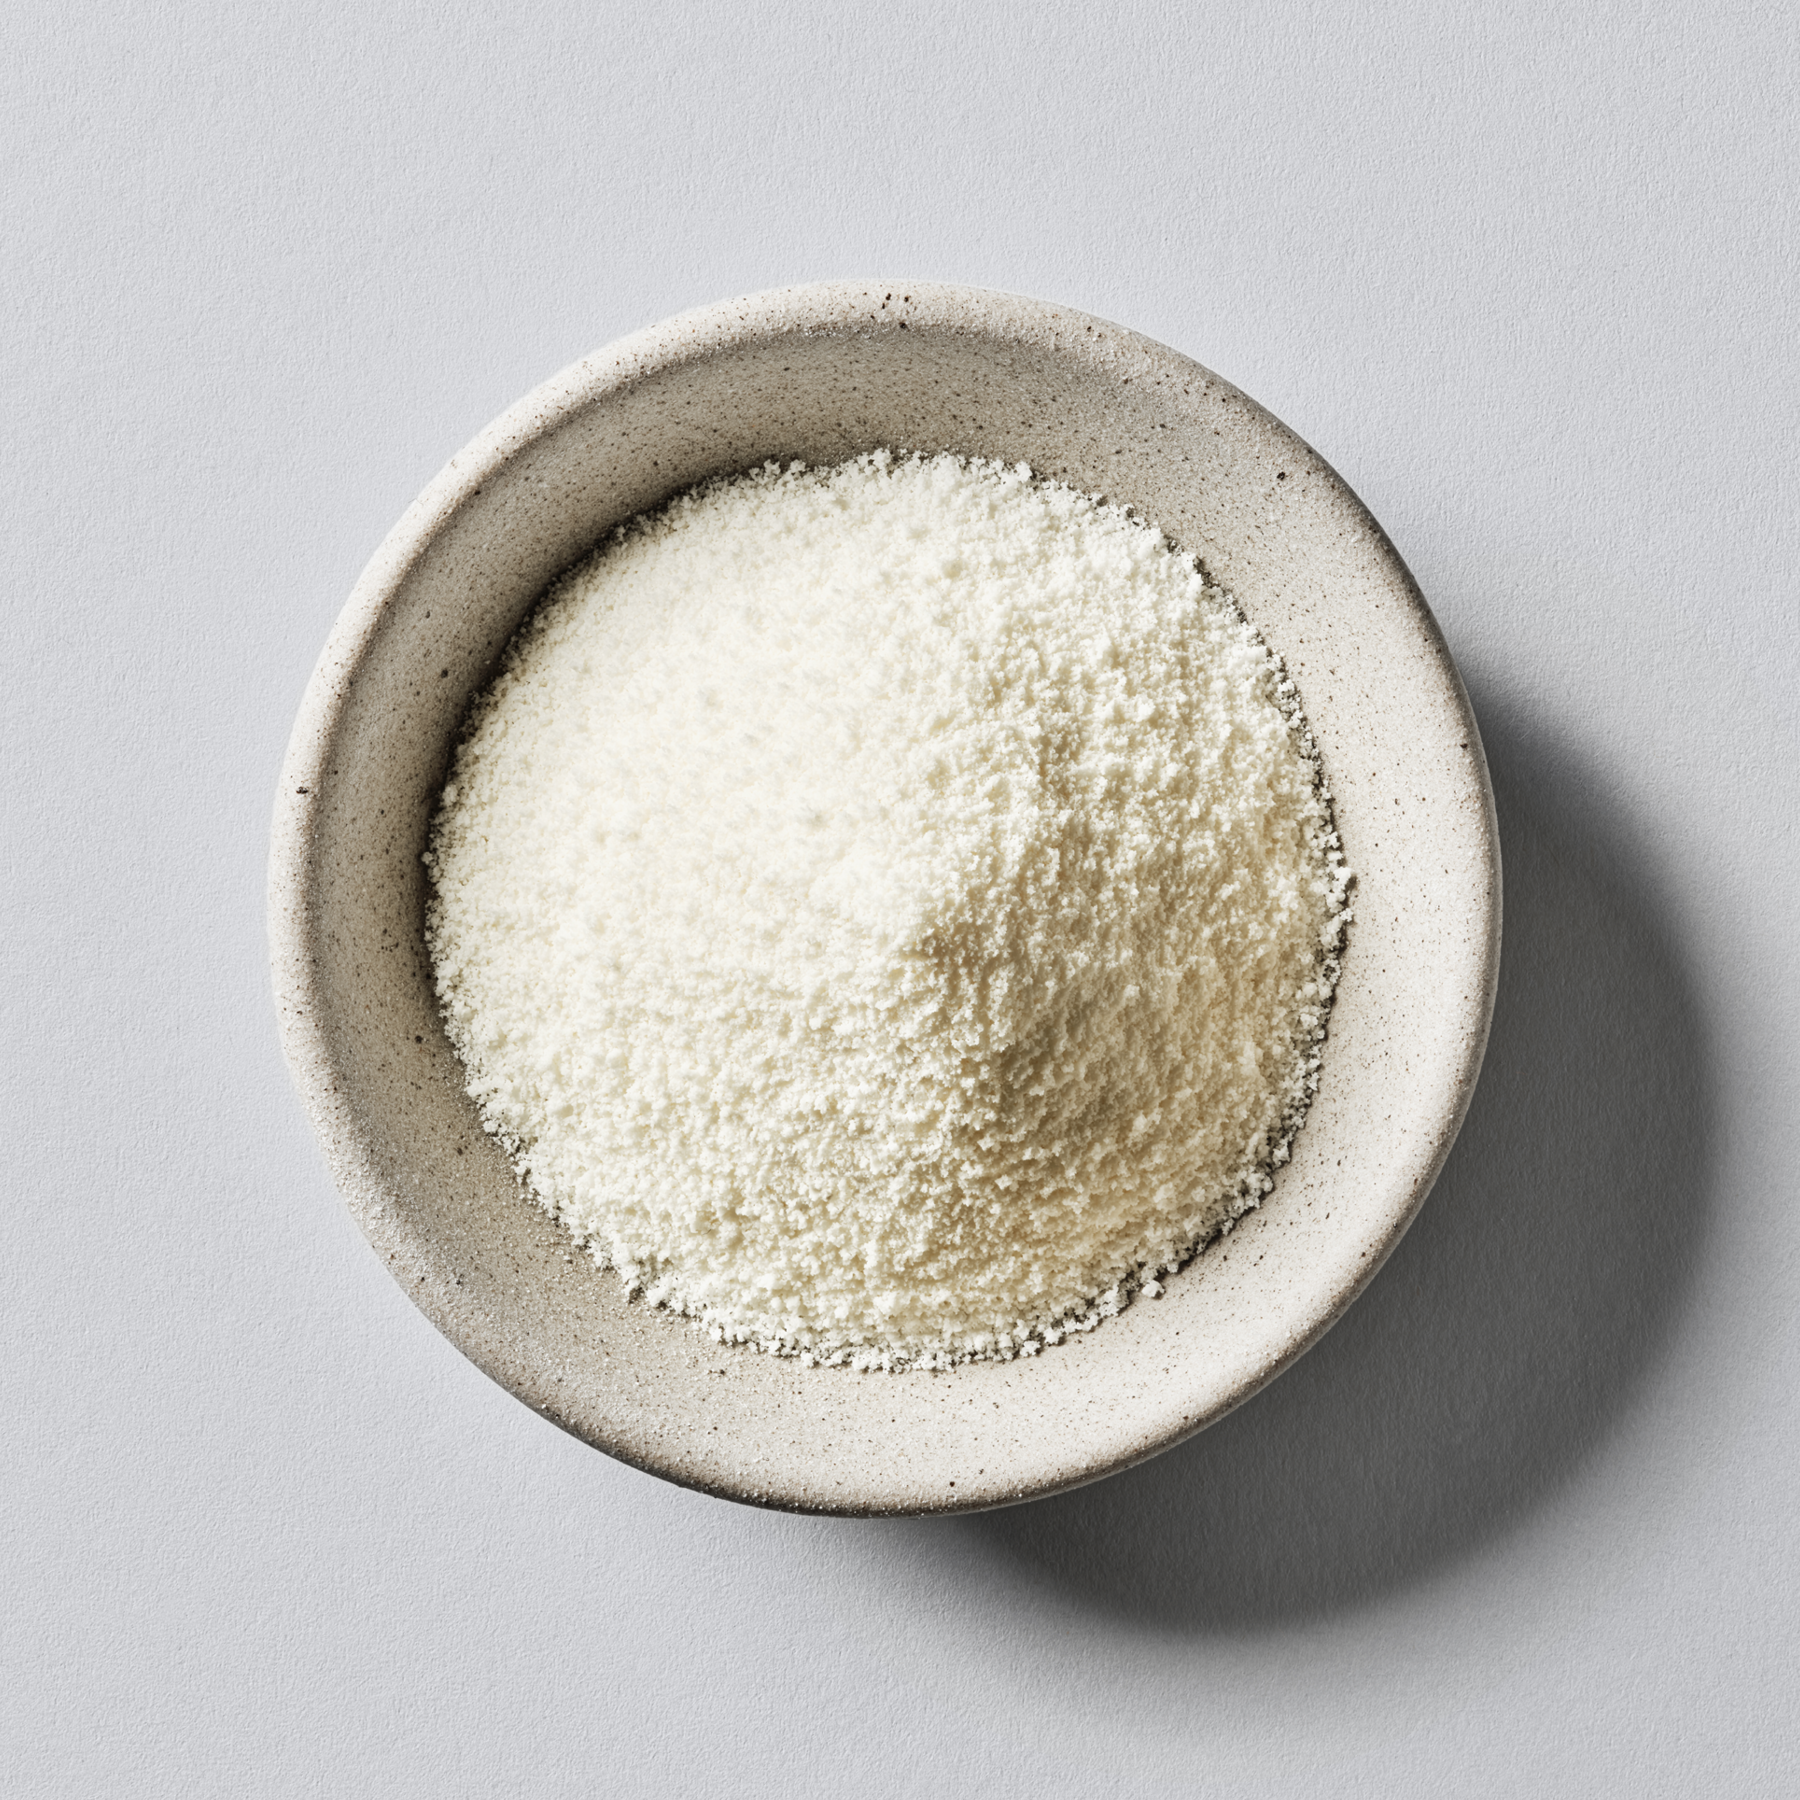 A small ceramic bowl of Sports Research Marine Collagen Peptides powder.